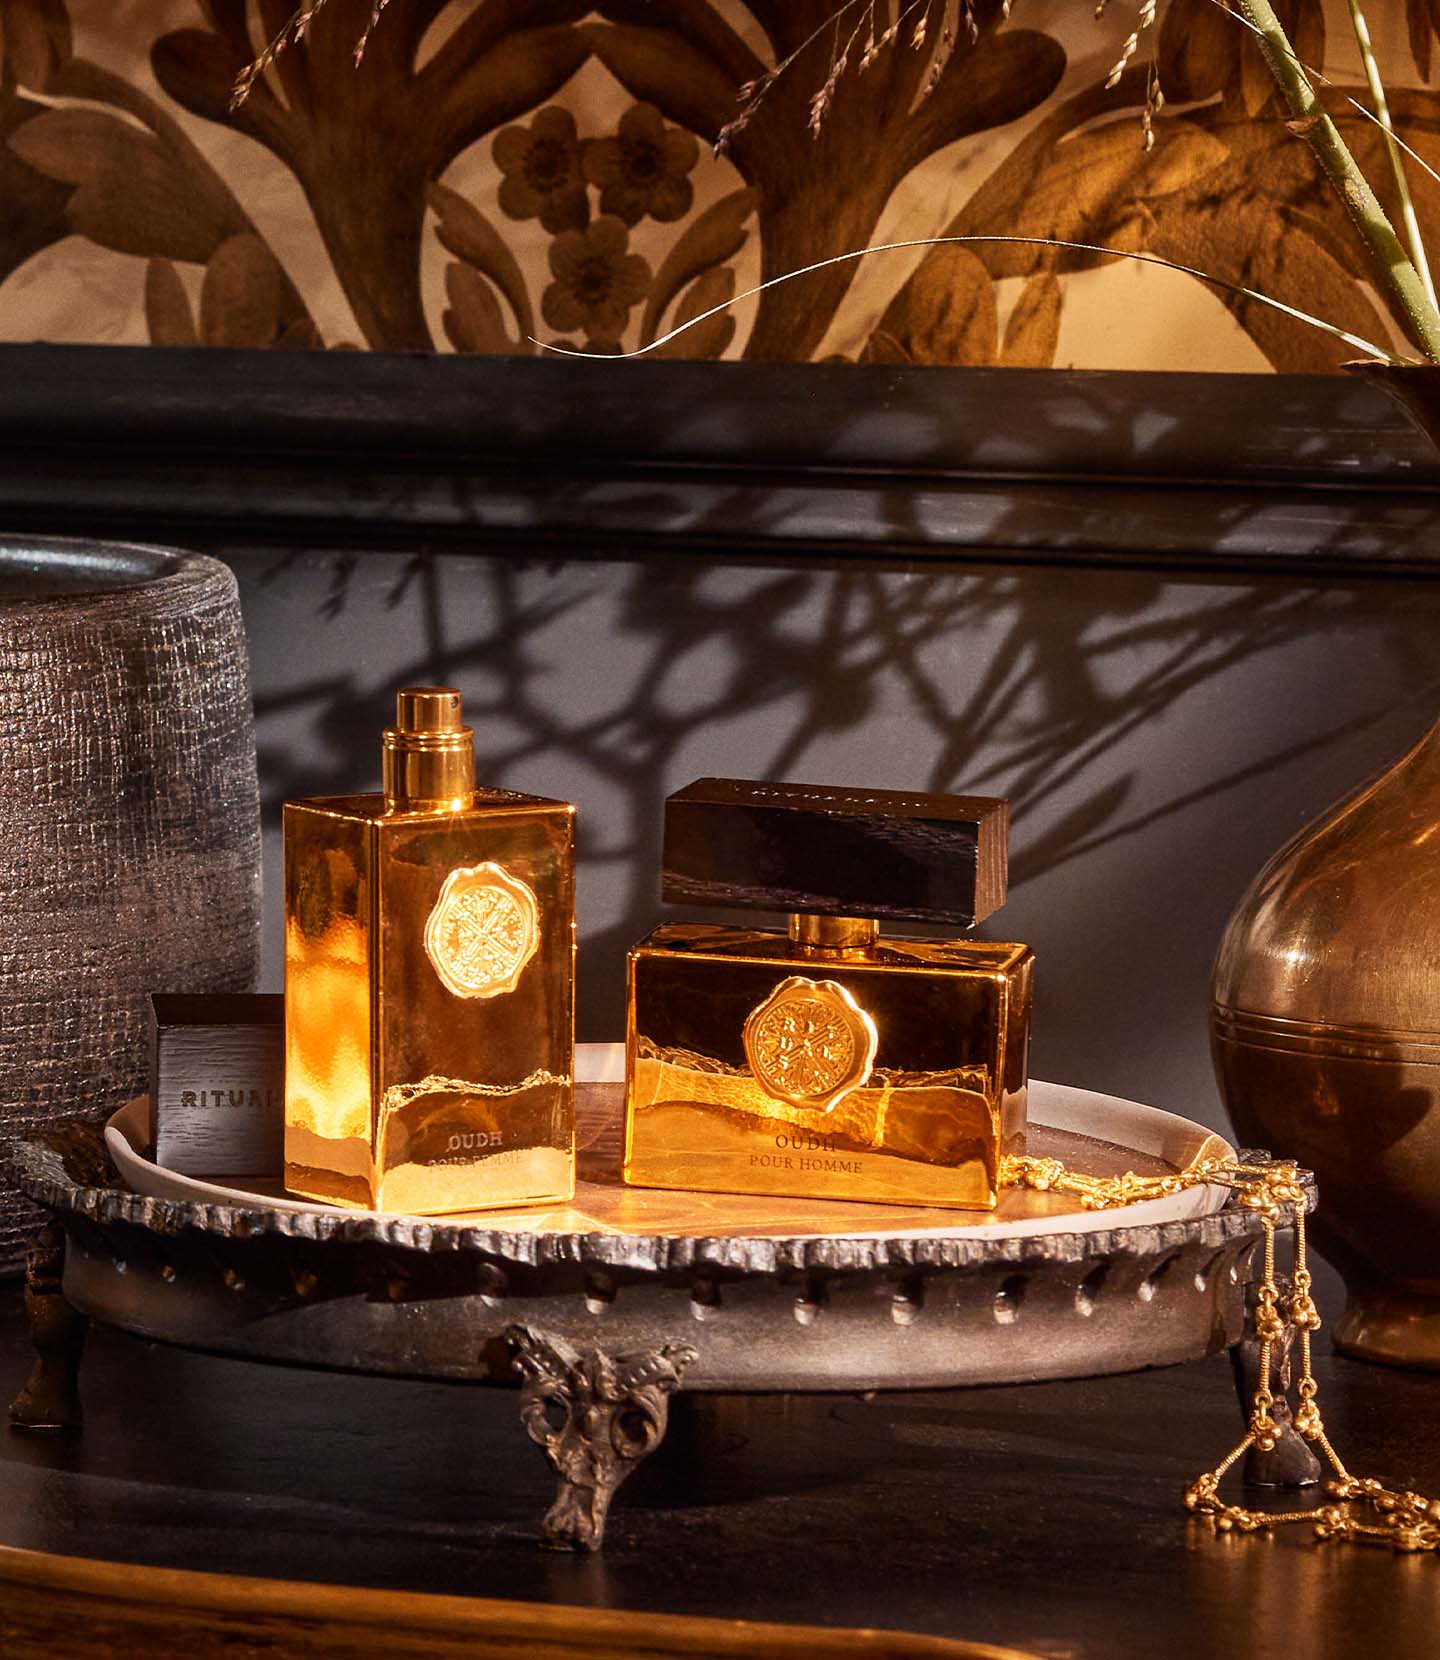 Rituals Cosmetics - Ancient tradition meets modern luxury in The Ritual of  Oudh collection. Luxury home and body products inspired by a rare, fragrant  resin harvested from the agar tree. Smoky, warm